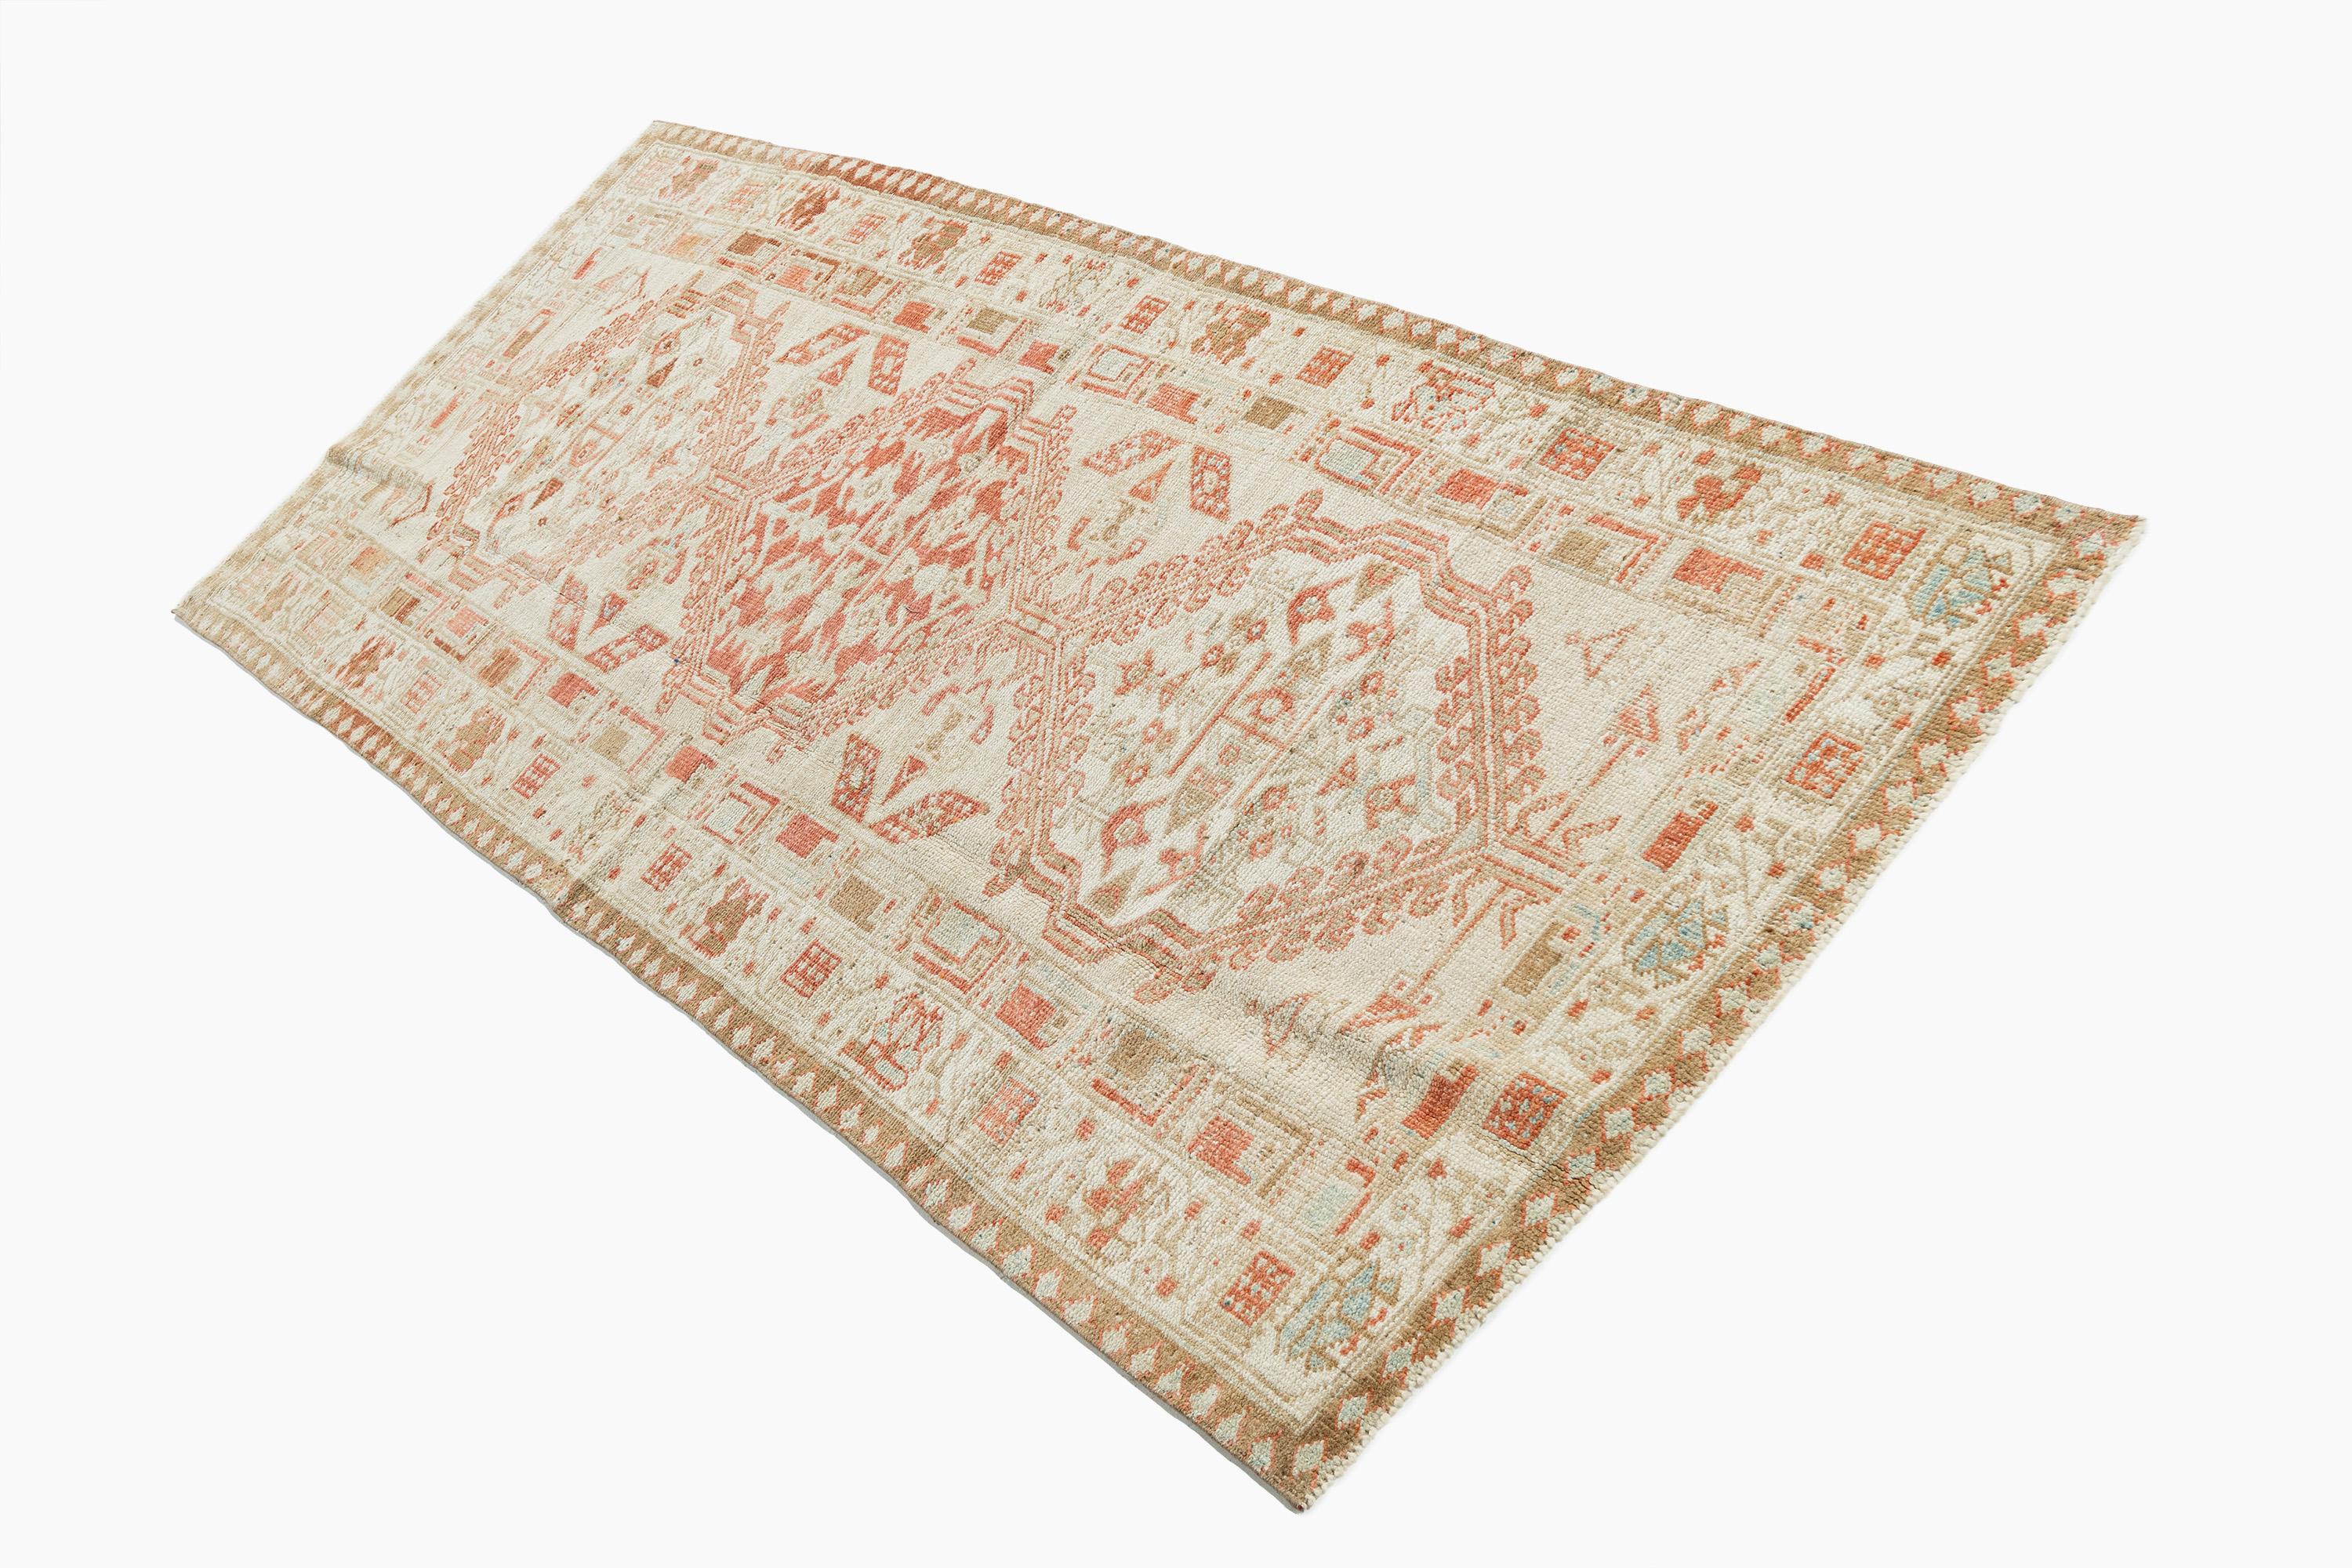 Antique Persian Serab Runner 3' X 7'10 In Good Condition For Sale In New York, NY